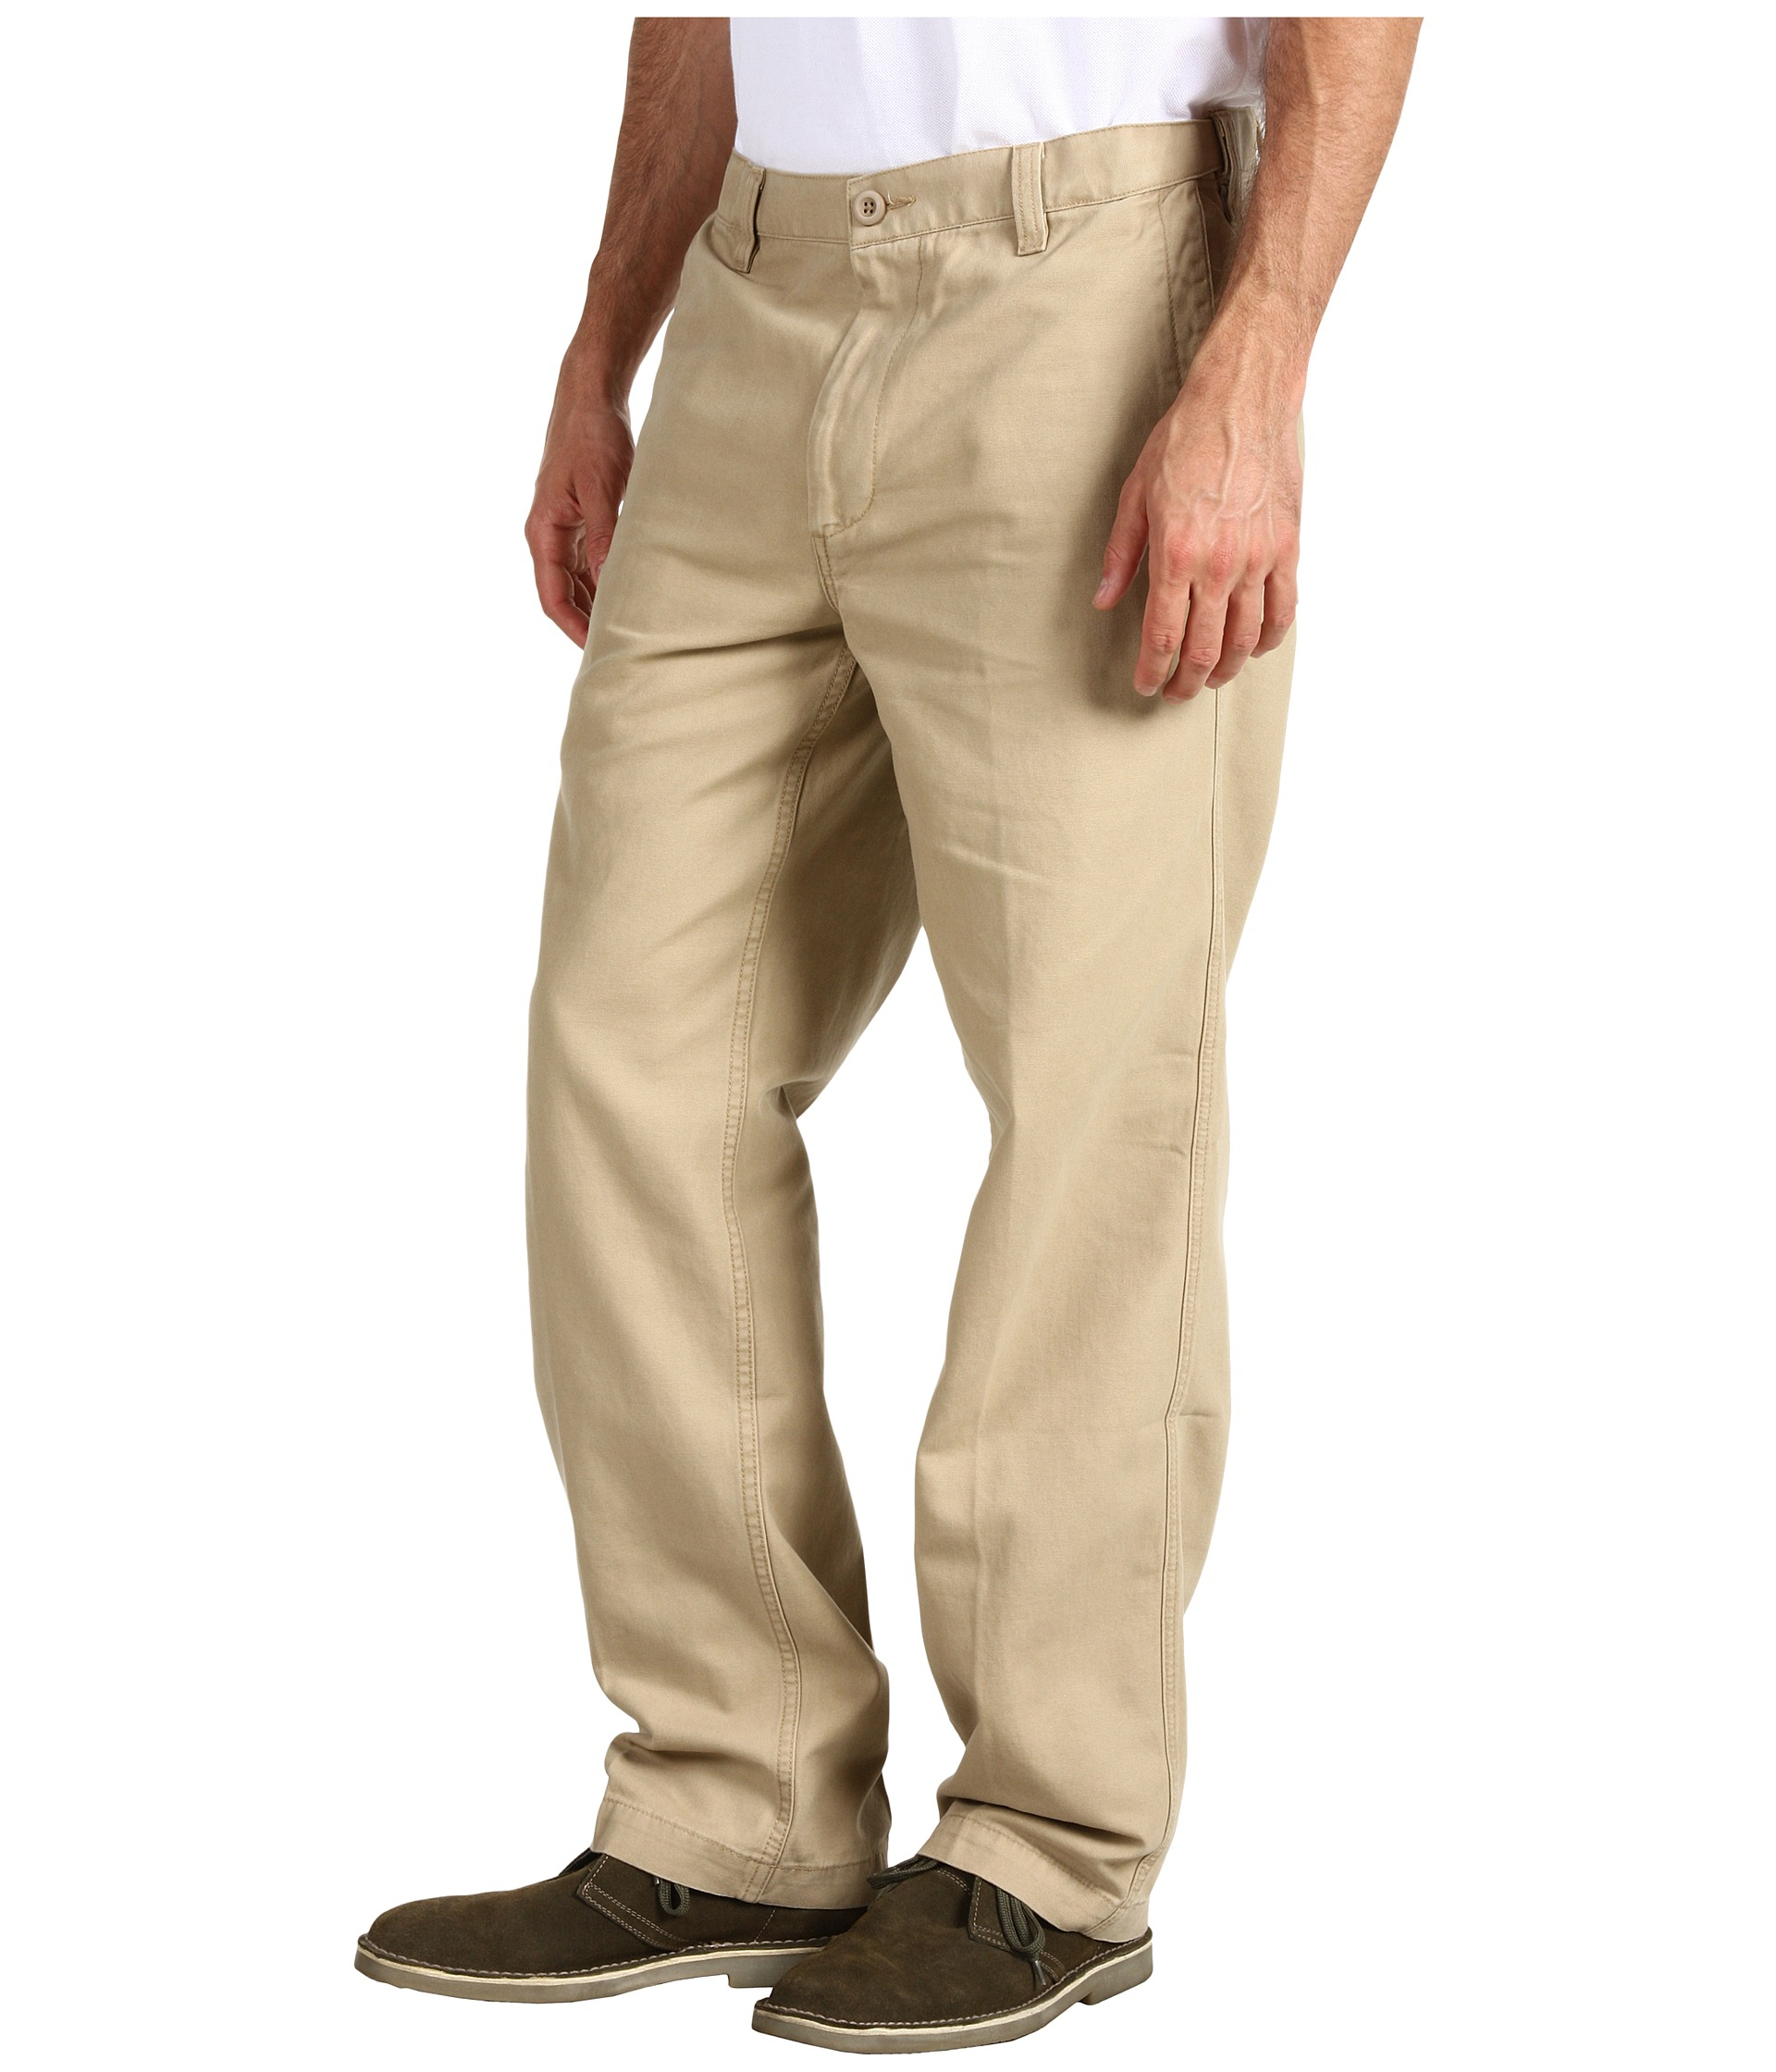 Lyst - Dockers Comfort Cargo D3 Classic Fit in Natural for Men